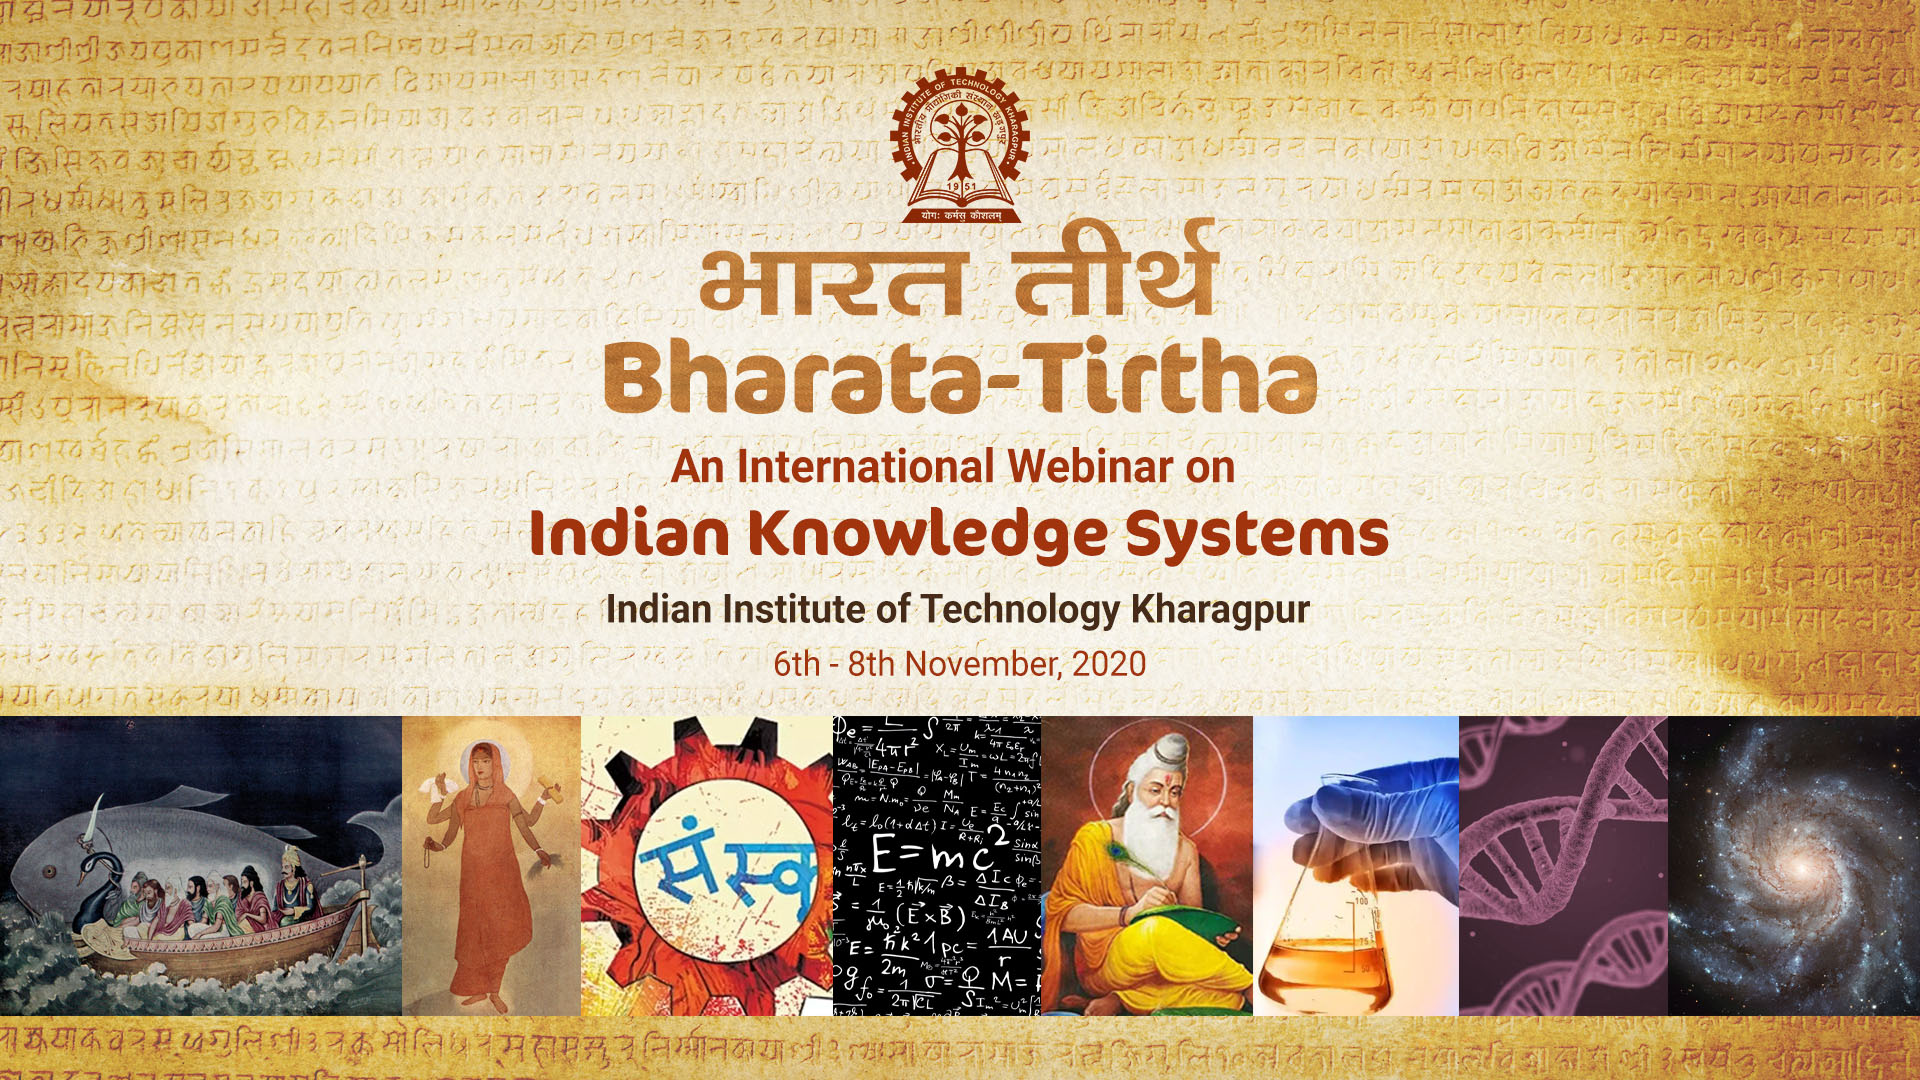 Indian Knowledge Systems to Explore Revival of Indian Scientific Heritage Studies: ‘Bharata Tirtha’ Webinar by IIT Kharagpur